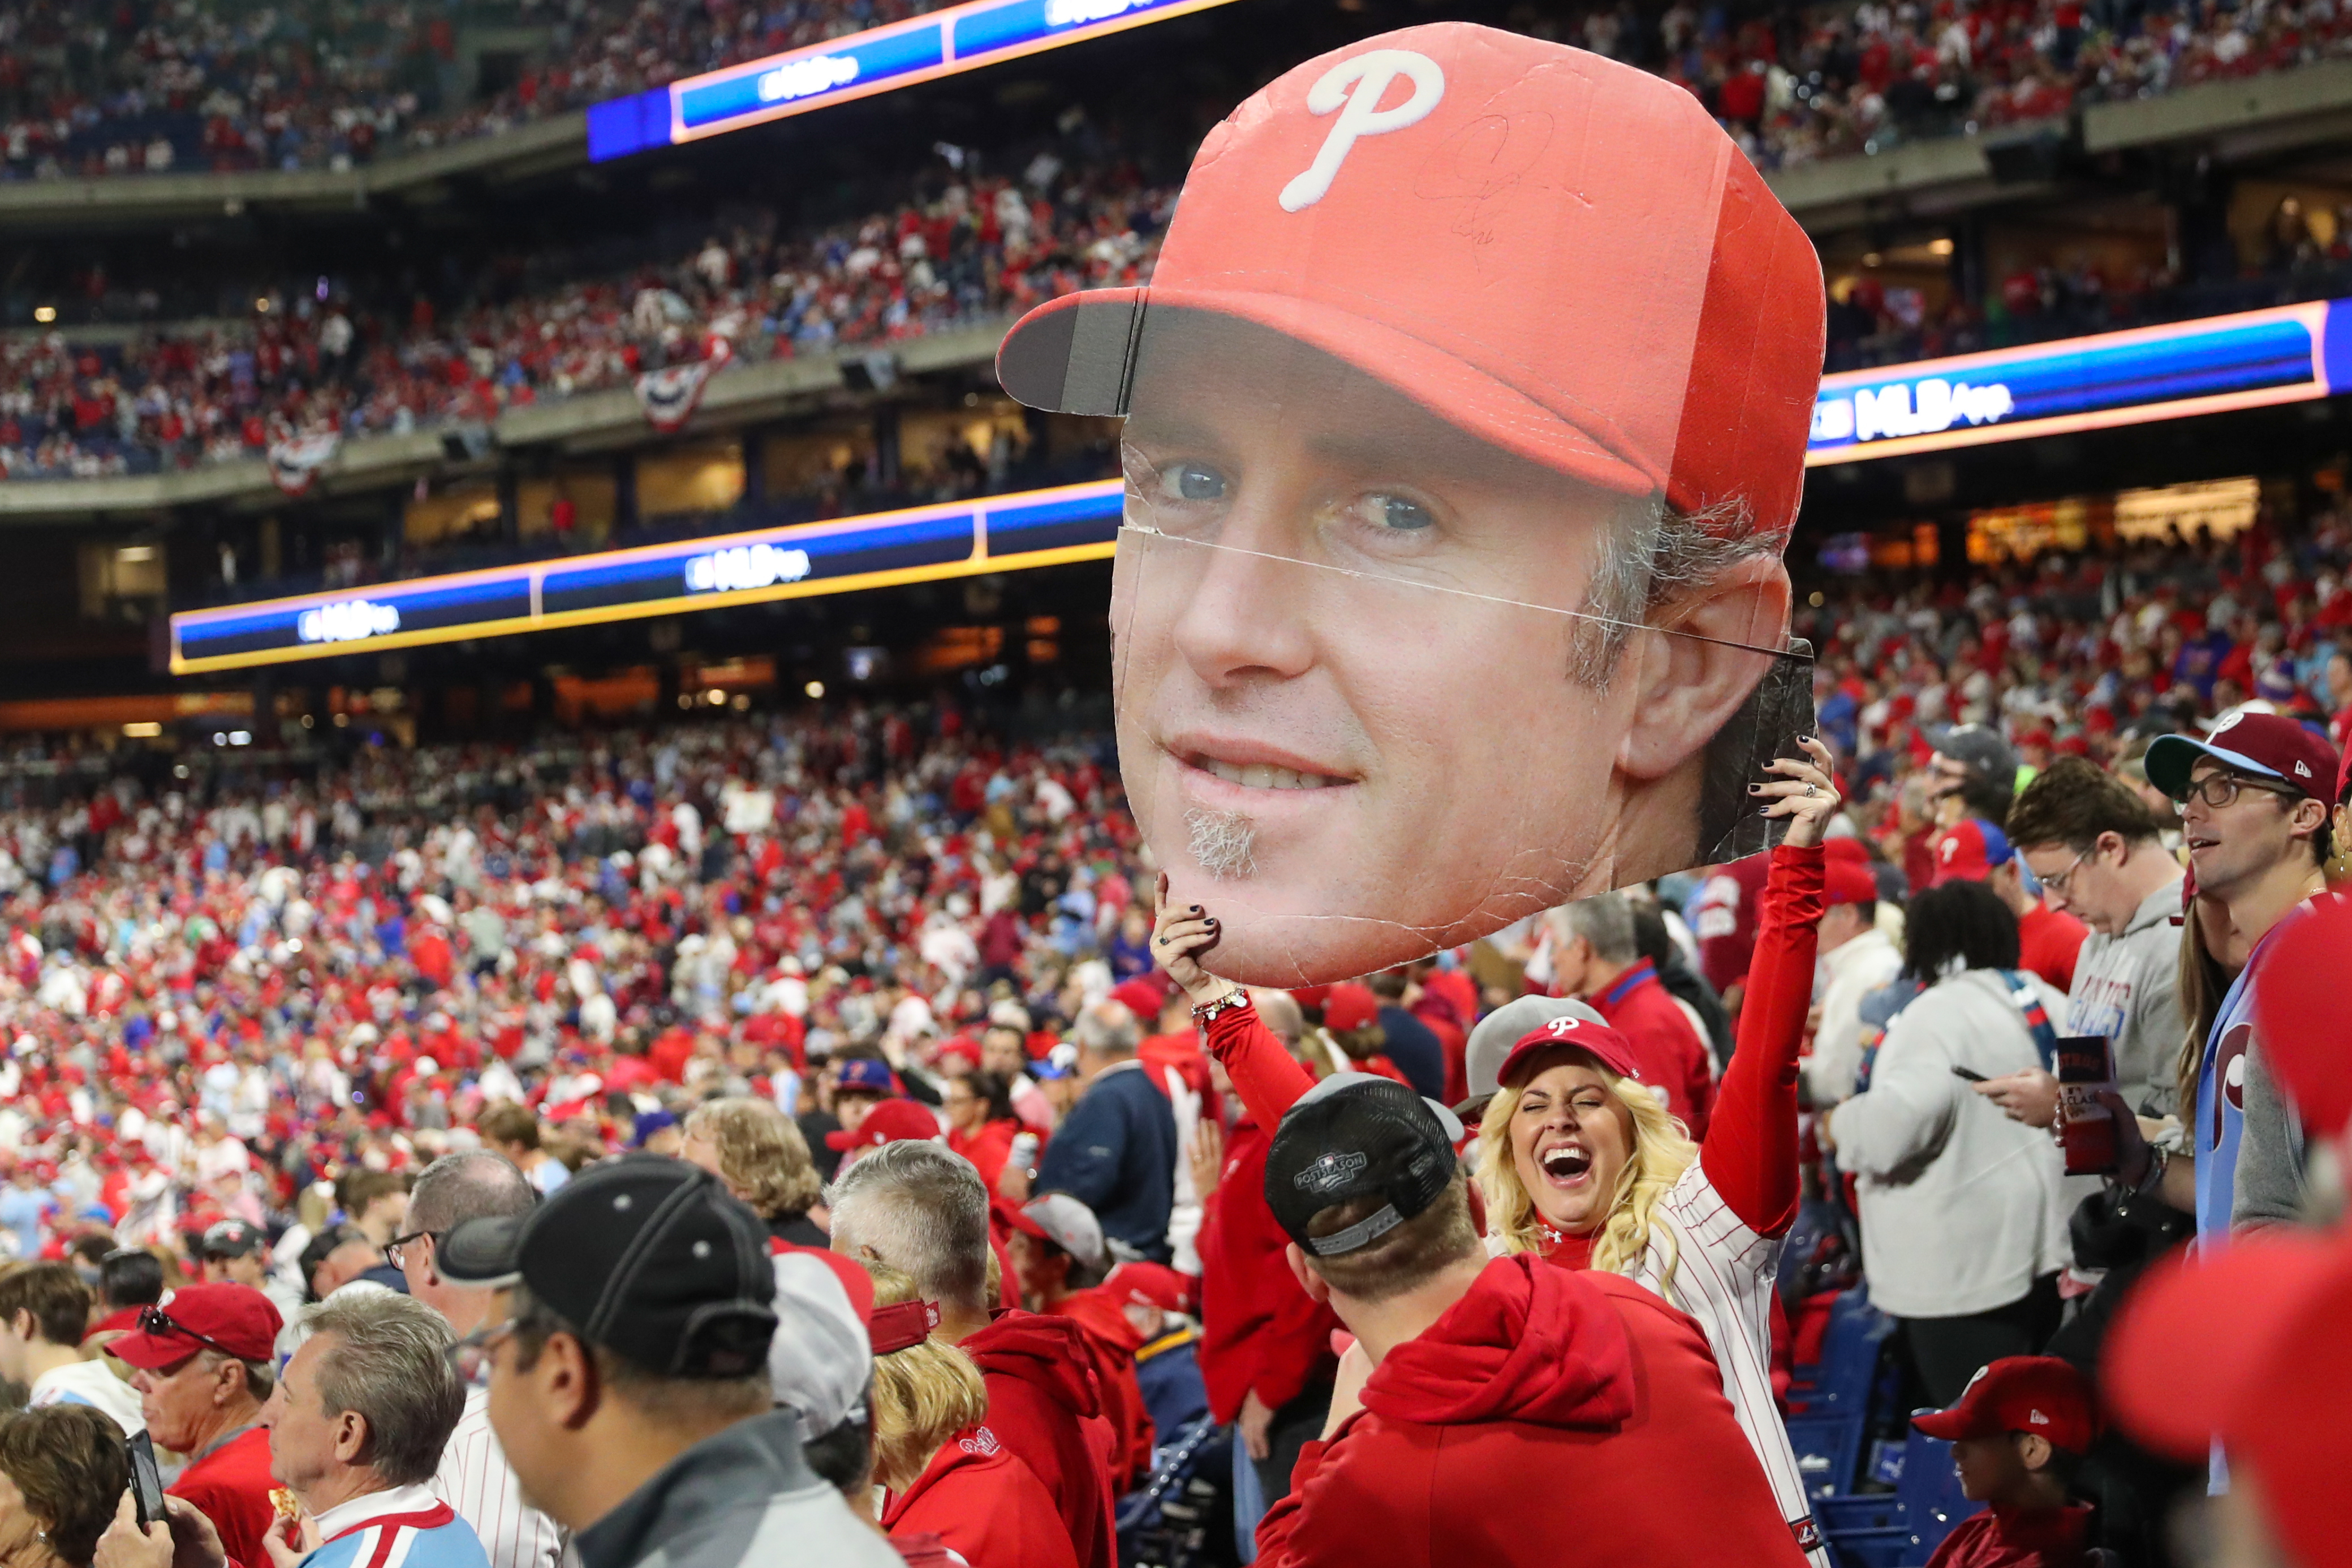 Chase Utley Likely Plays His Last Game in Philadelphia - The Ringer